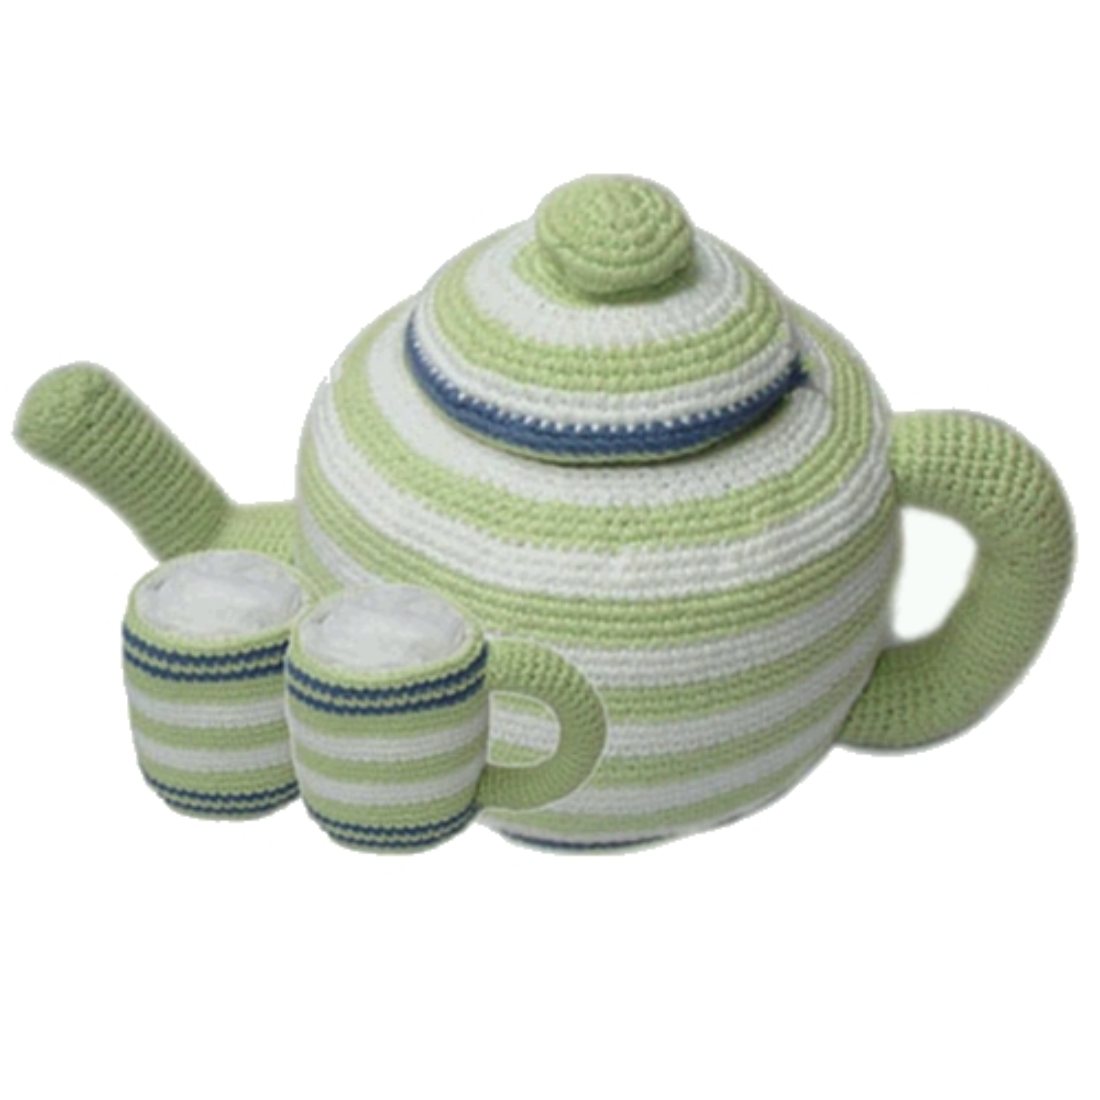 Ecofriendly Gifts. Fairtrade Gifts. Striped Toy Tea Set